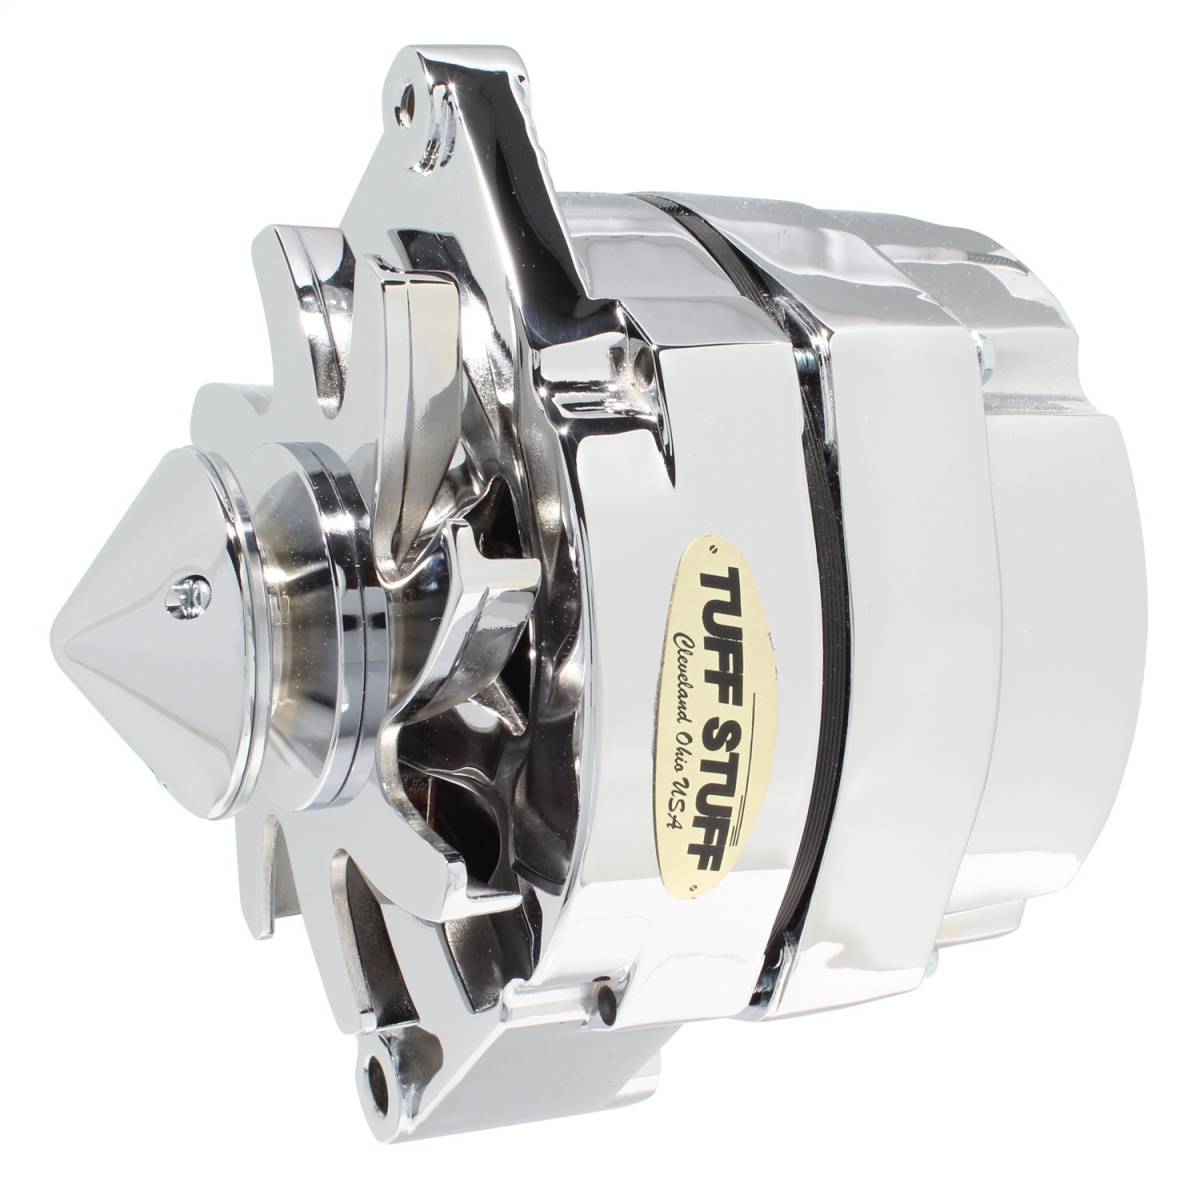 Tuff Stuff Performance - Silver Bullet Alternator 140 AMP OEM Or 1 Wire V Groove Bullet Pulley 4.85 in. Case Depth Lower Mount Boss 2 in. Long Polished 9 Clocking 7140BBULL9